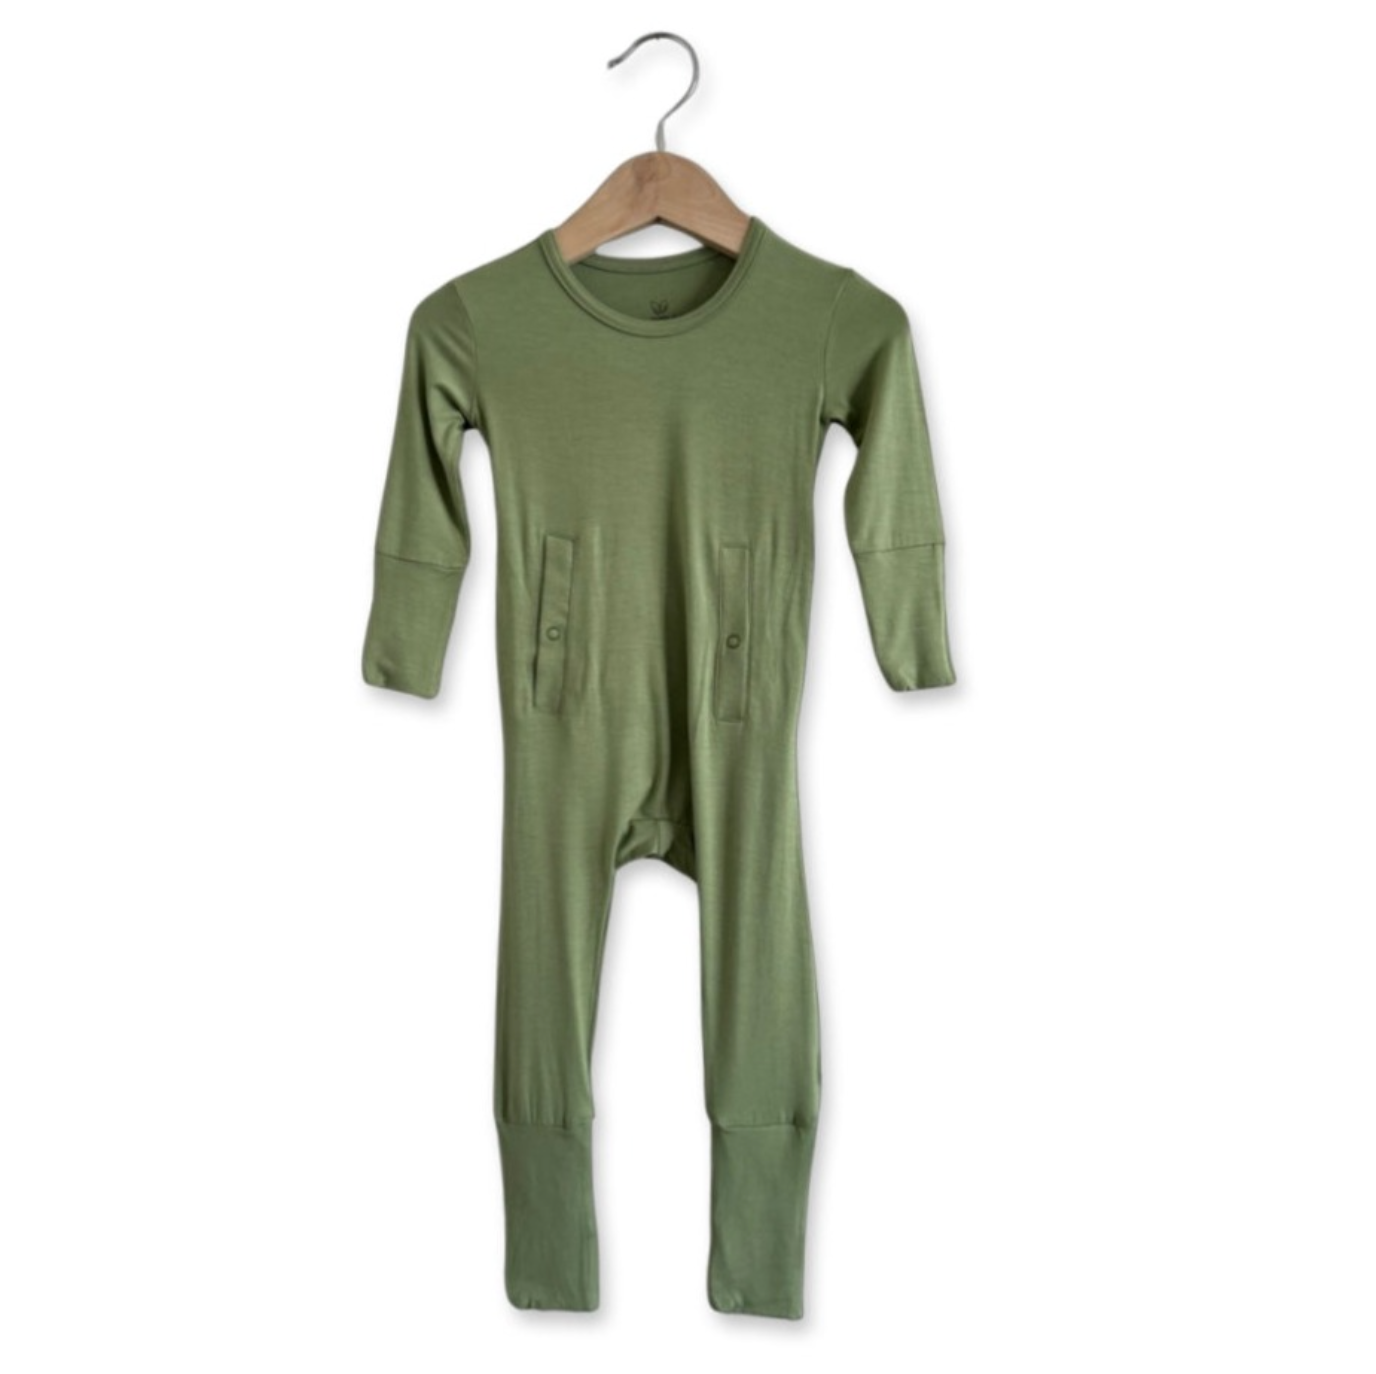 Matcha Adaptive Tube Access with snaps Kid's Day to Night Romper